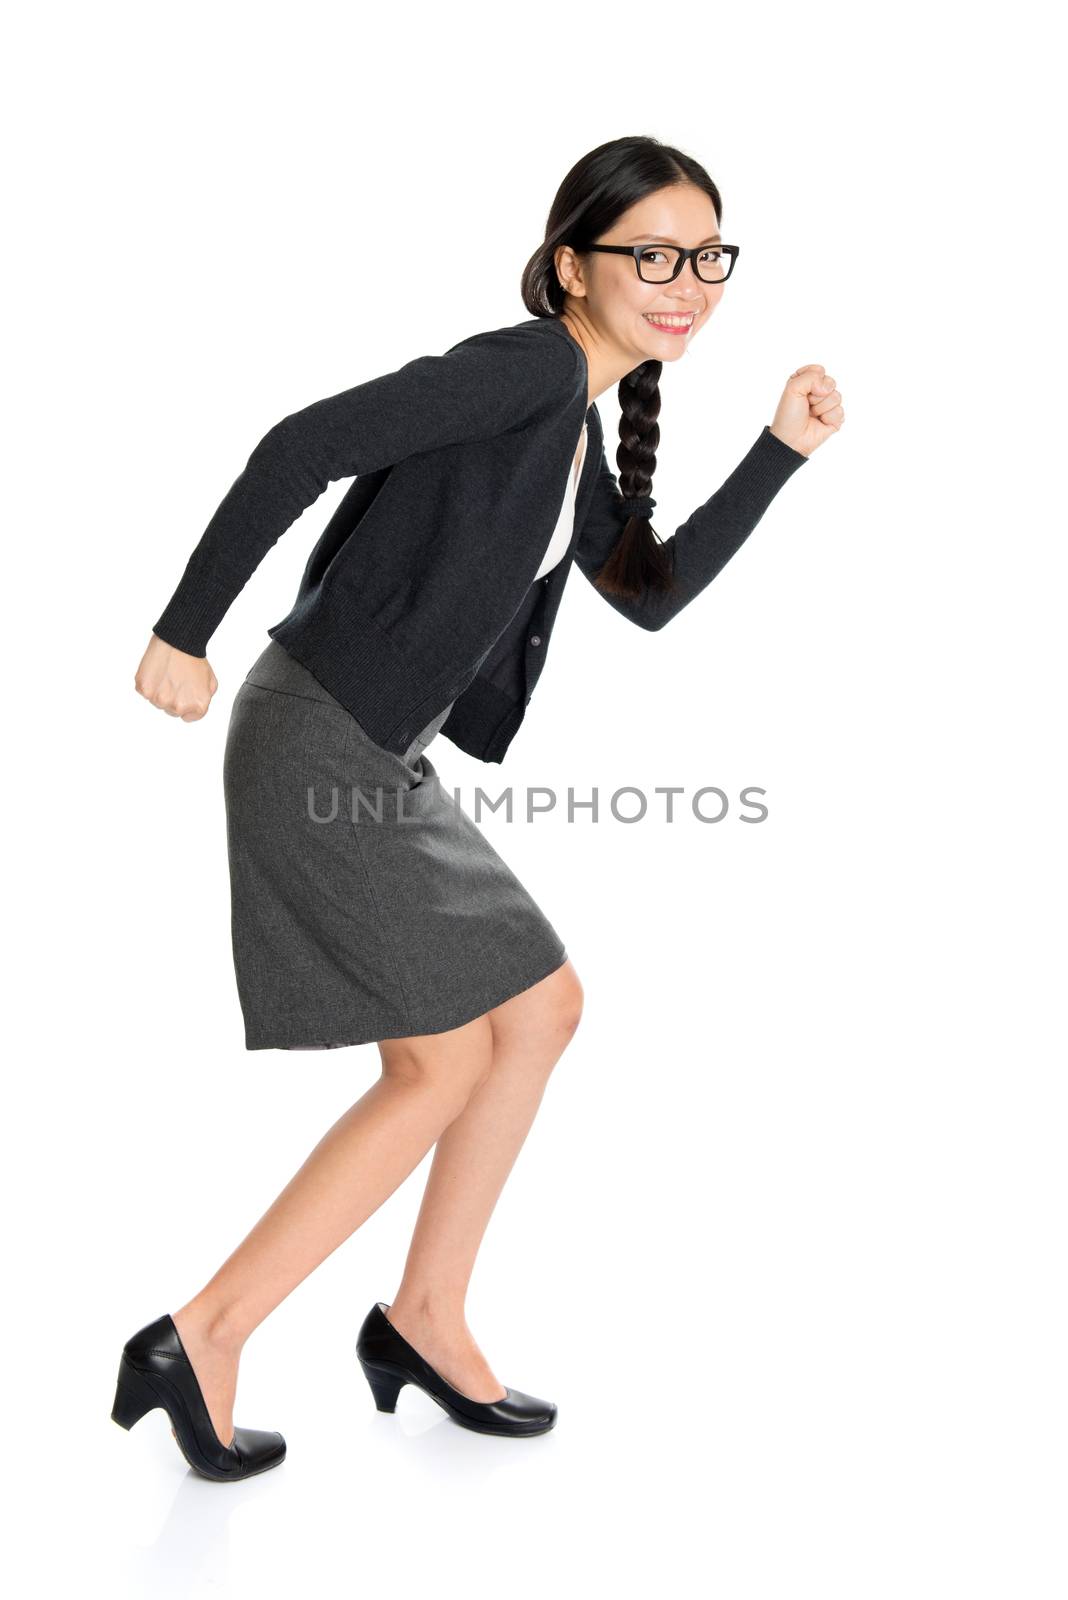 Full length portrait of young Asian girl running, isolated on white background.